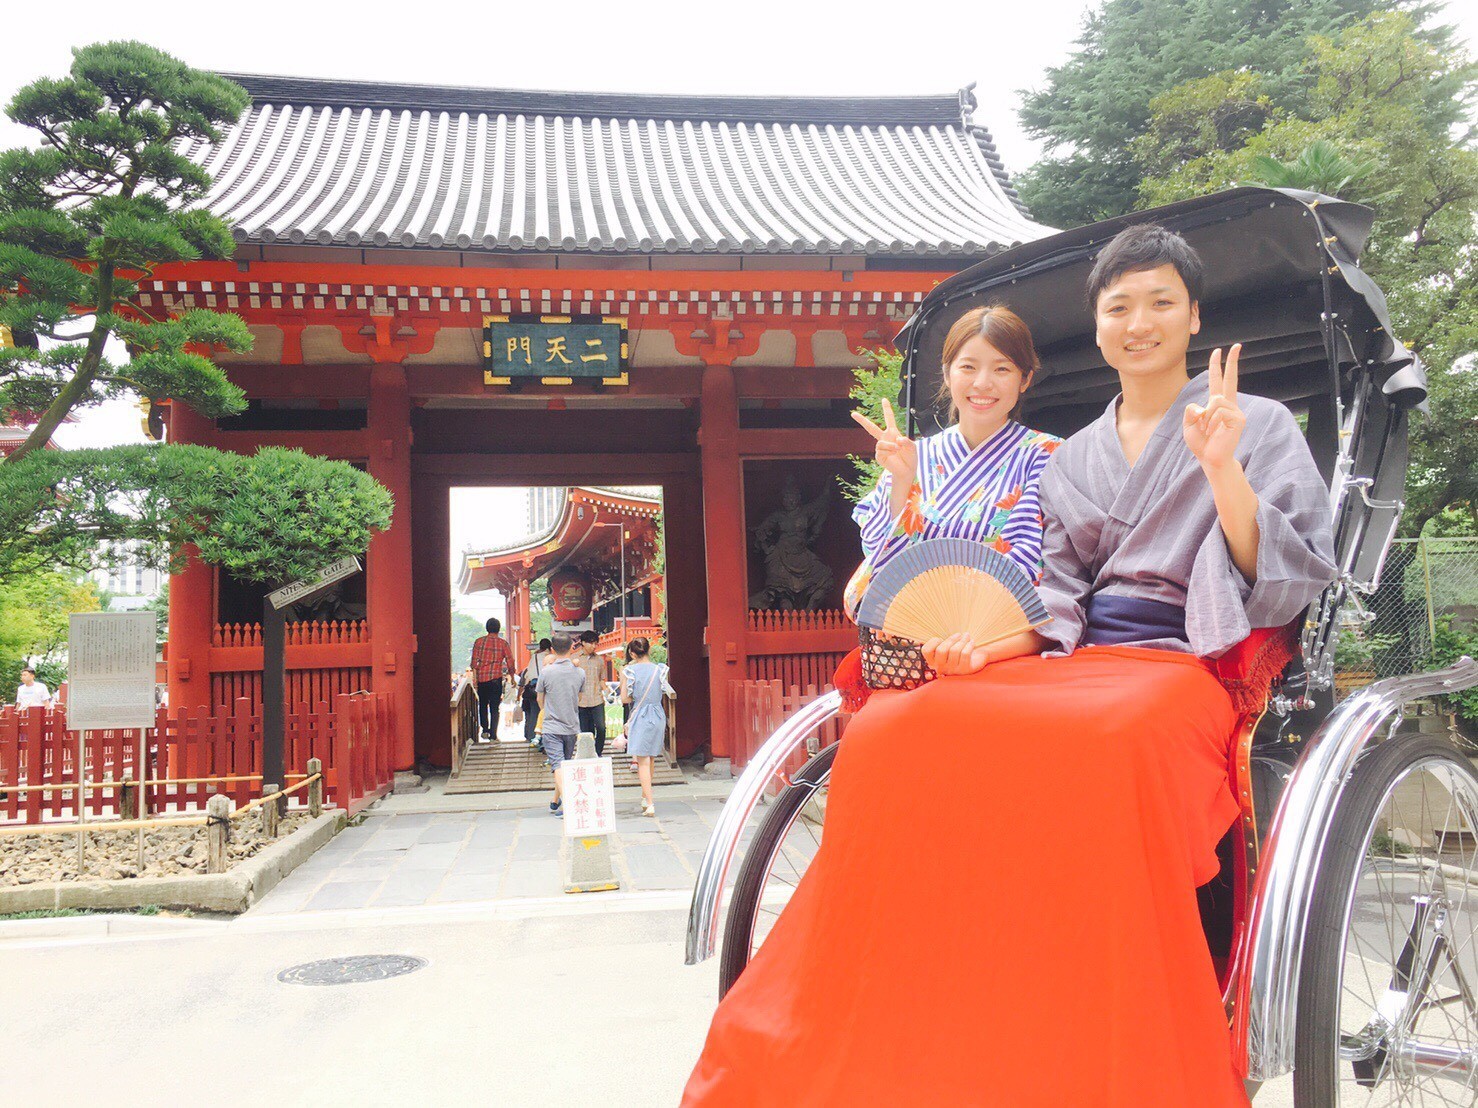 Rickshaw sightseeing in Asakusa! Introducing prices, times, recommended courses, and photo spots.